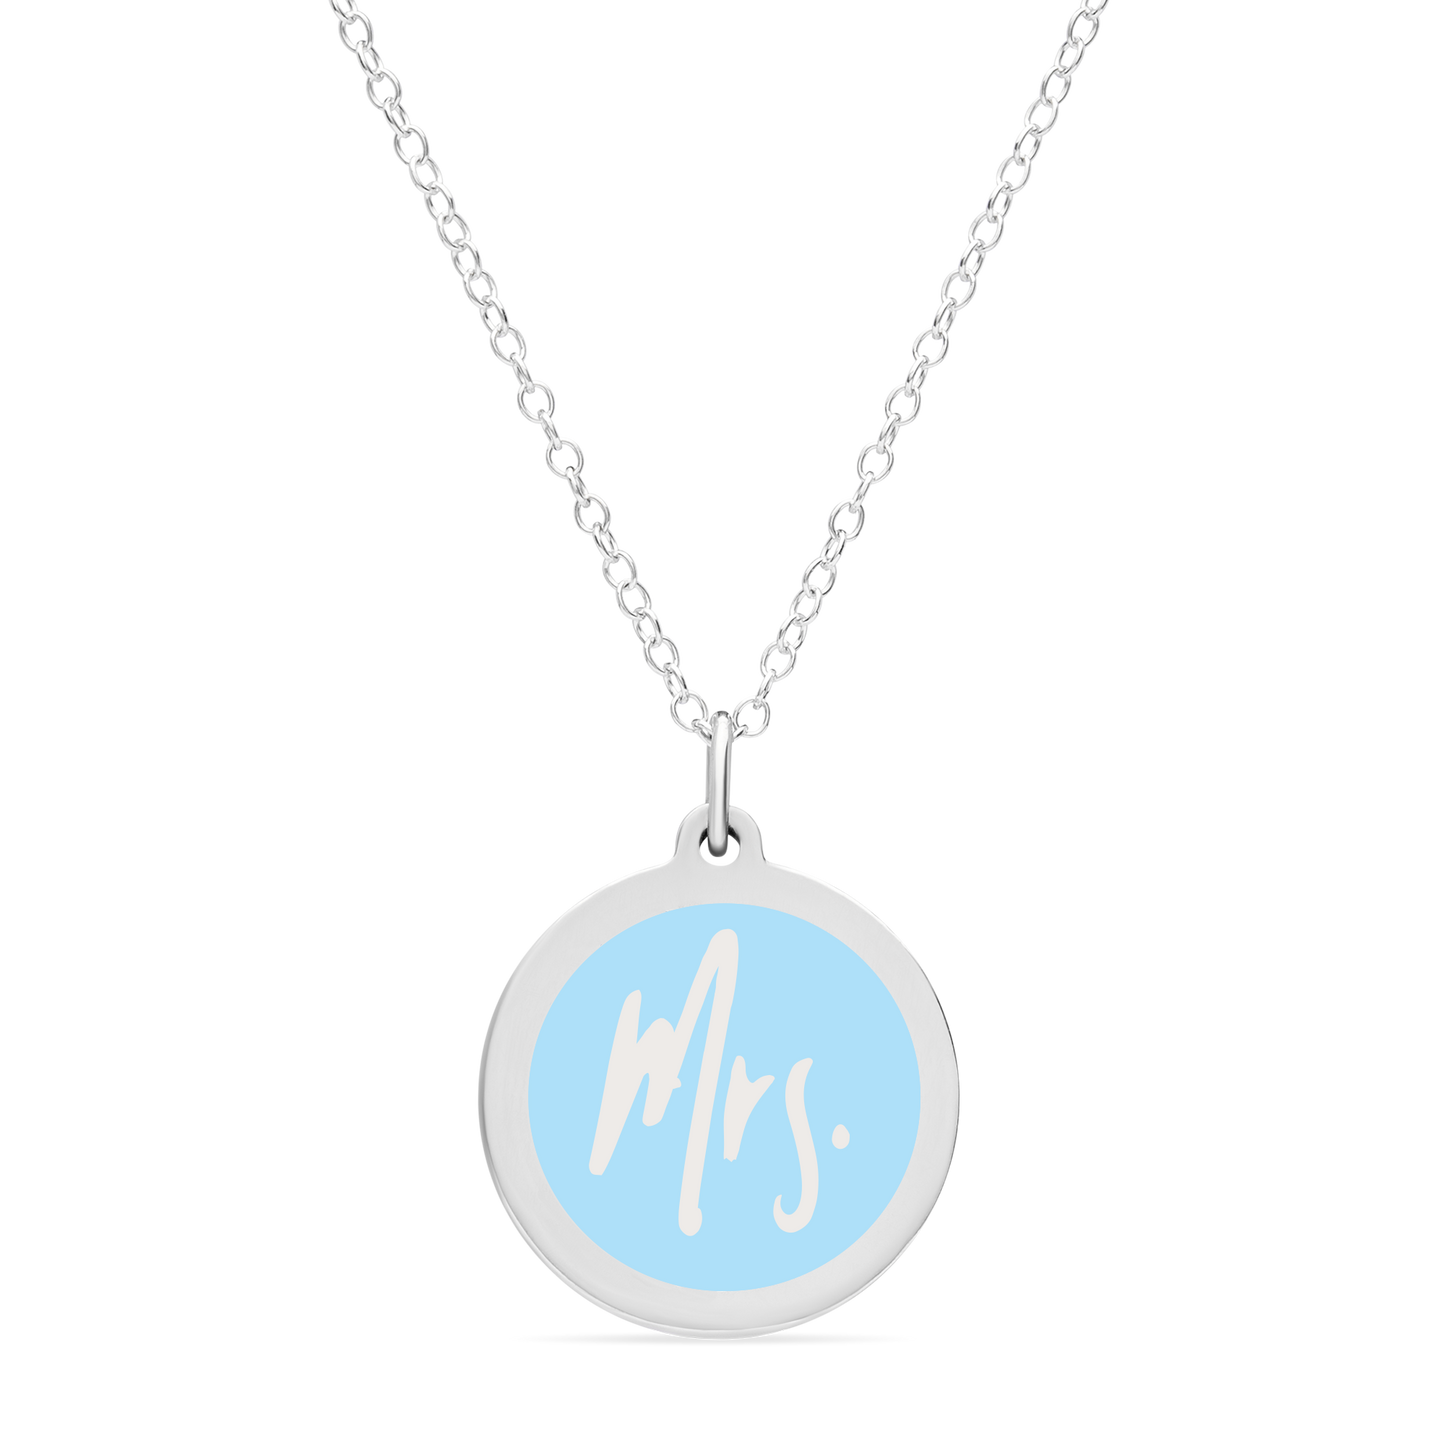 ORIGINAL MRS. CHARM in sterling silver with rhodium plate